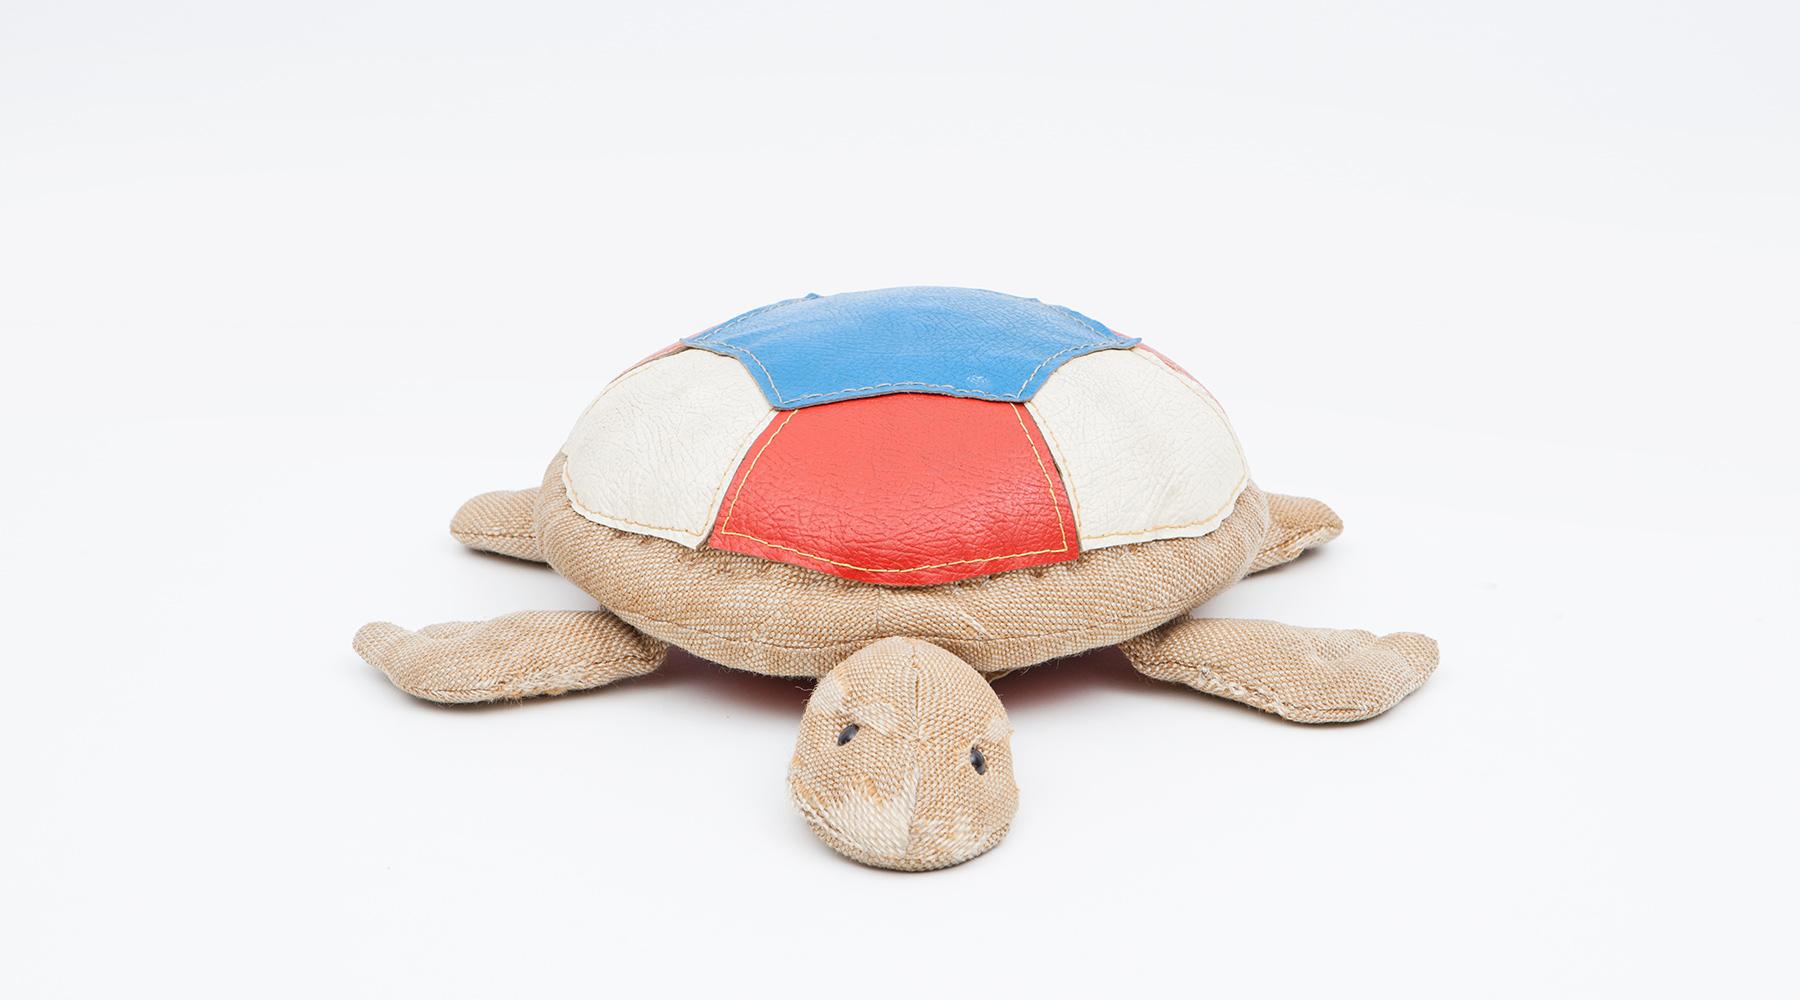 Turtle, children toy in jute and leather by Renate Müller, Germany, 1971.

Authentic animal toy from the 1970s by Renate Müller. Unique in shape and workmanship. This example shows a skate snail made of jute on three wheels.​The high quality toy is